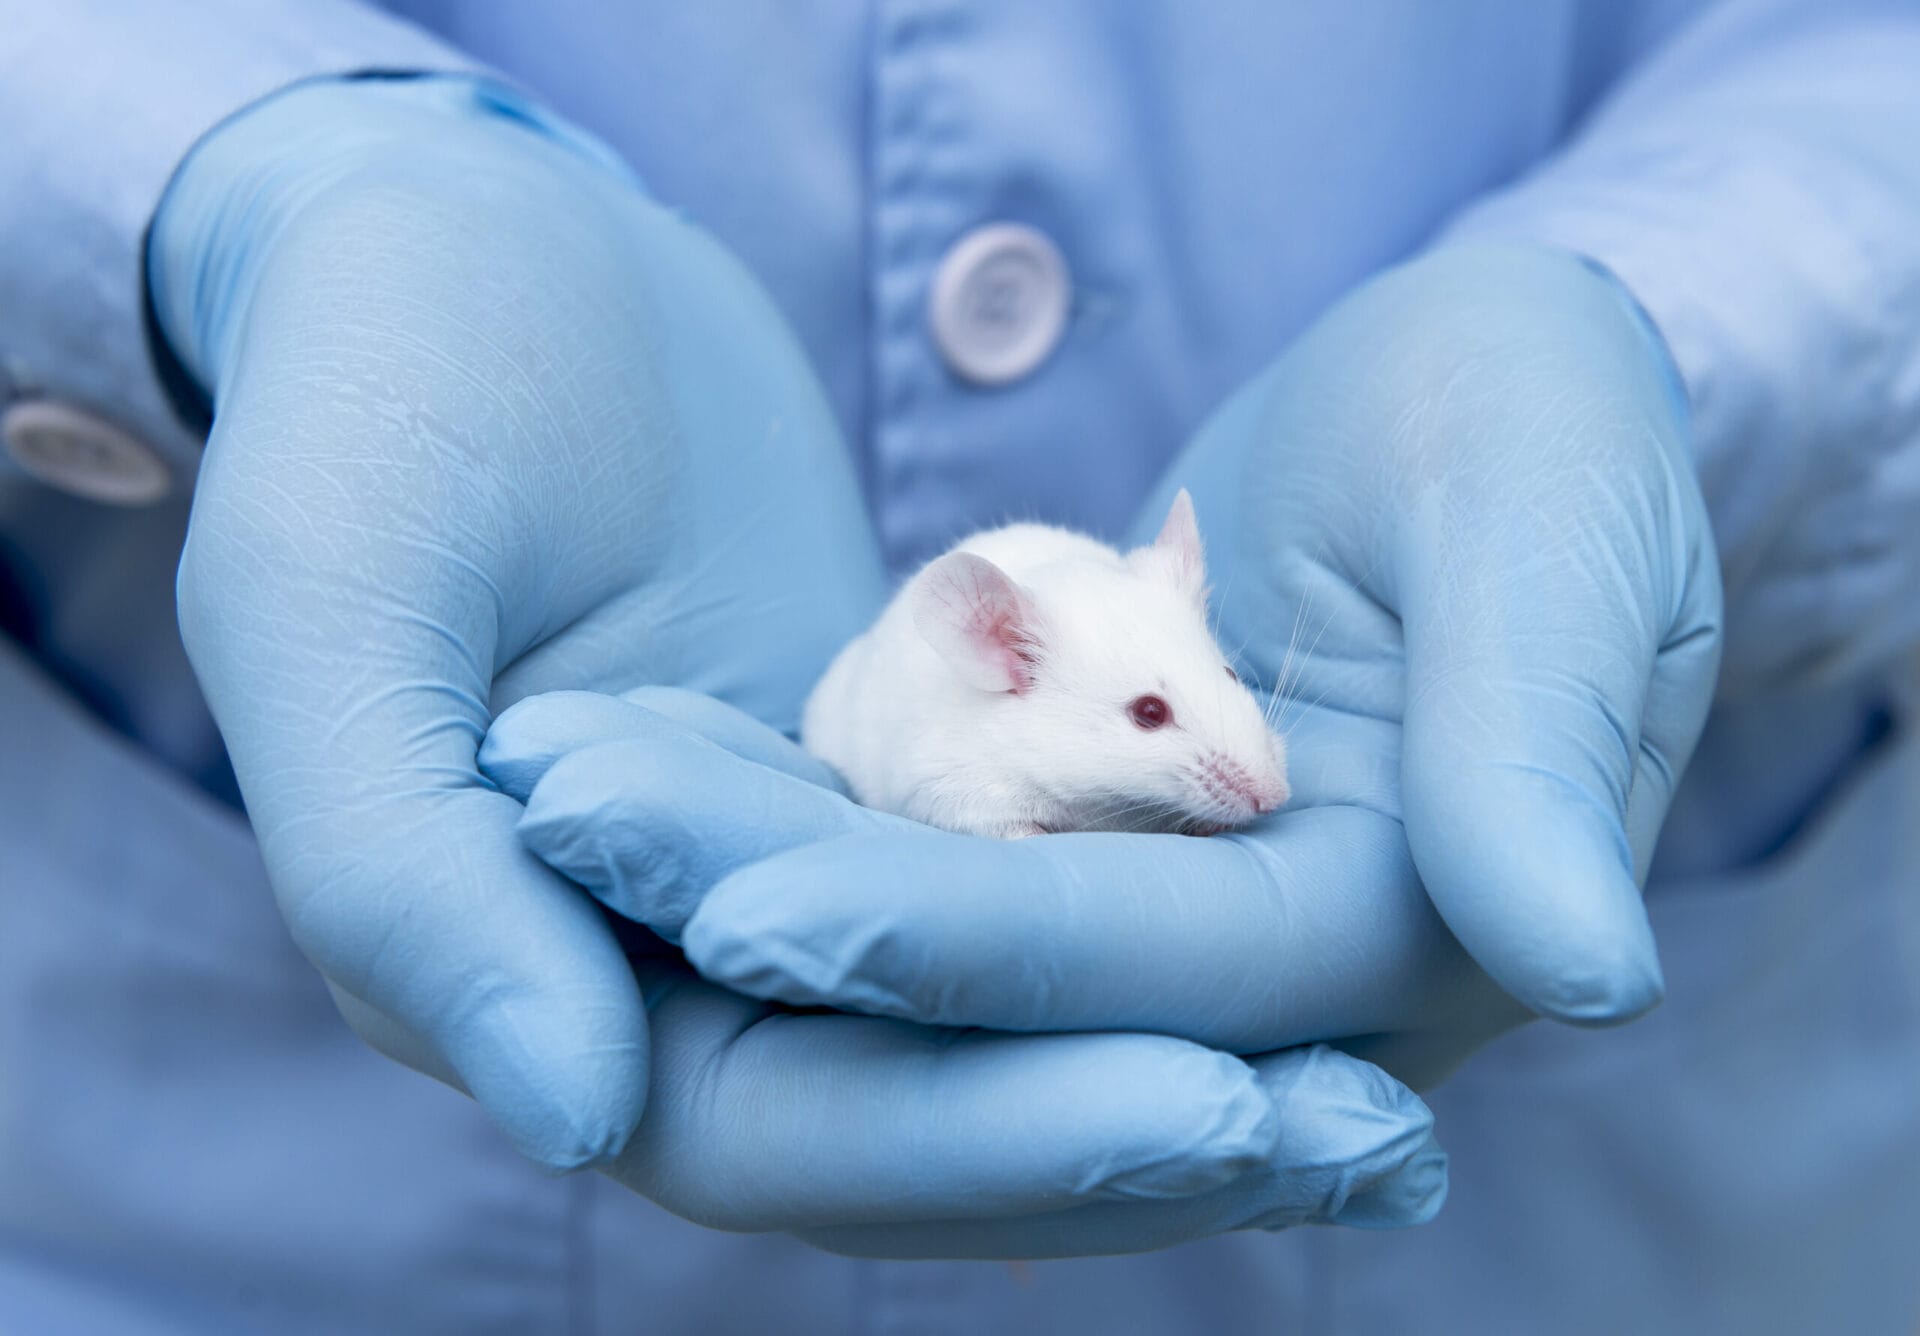 Small Experimental Mouse Is On The Laboratory Researcher's Hand